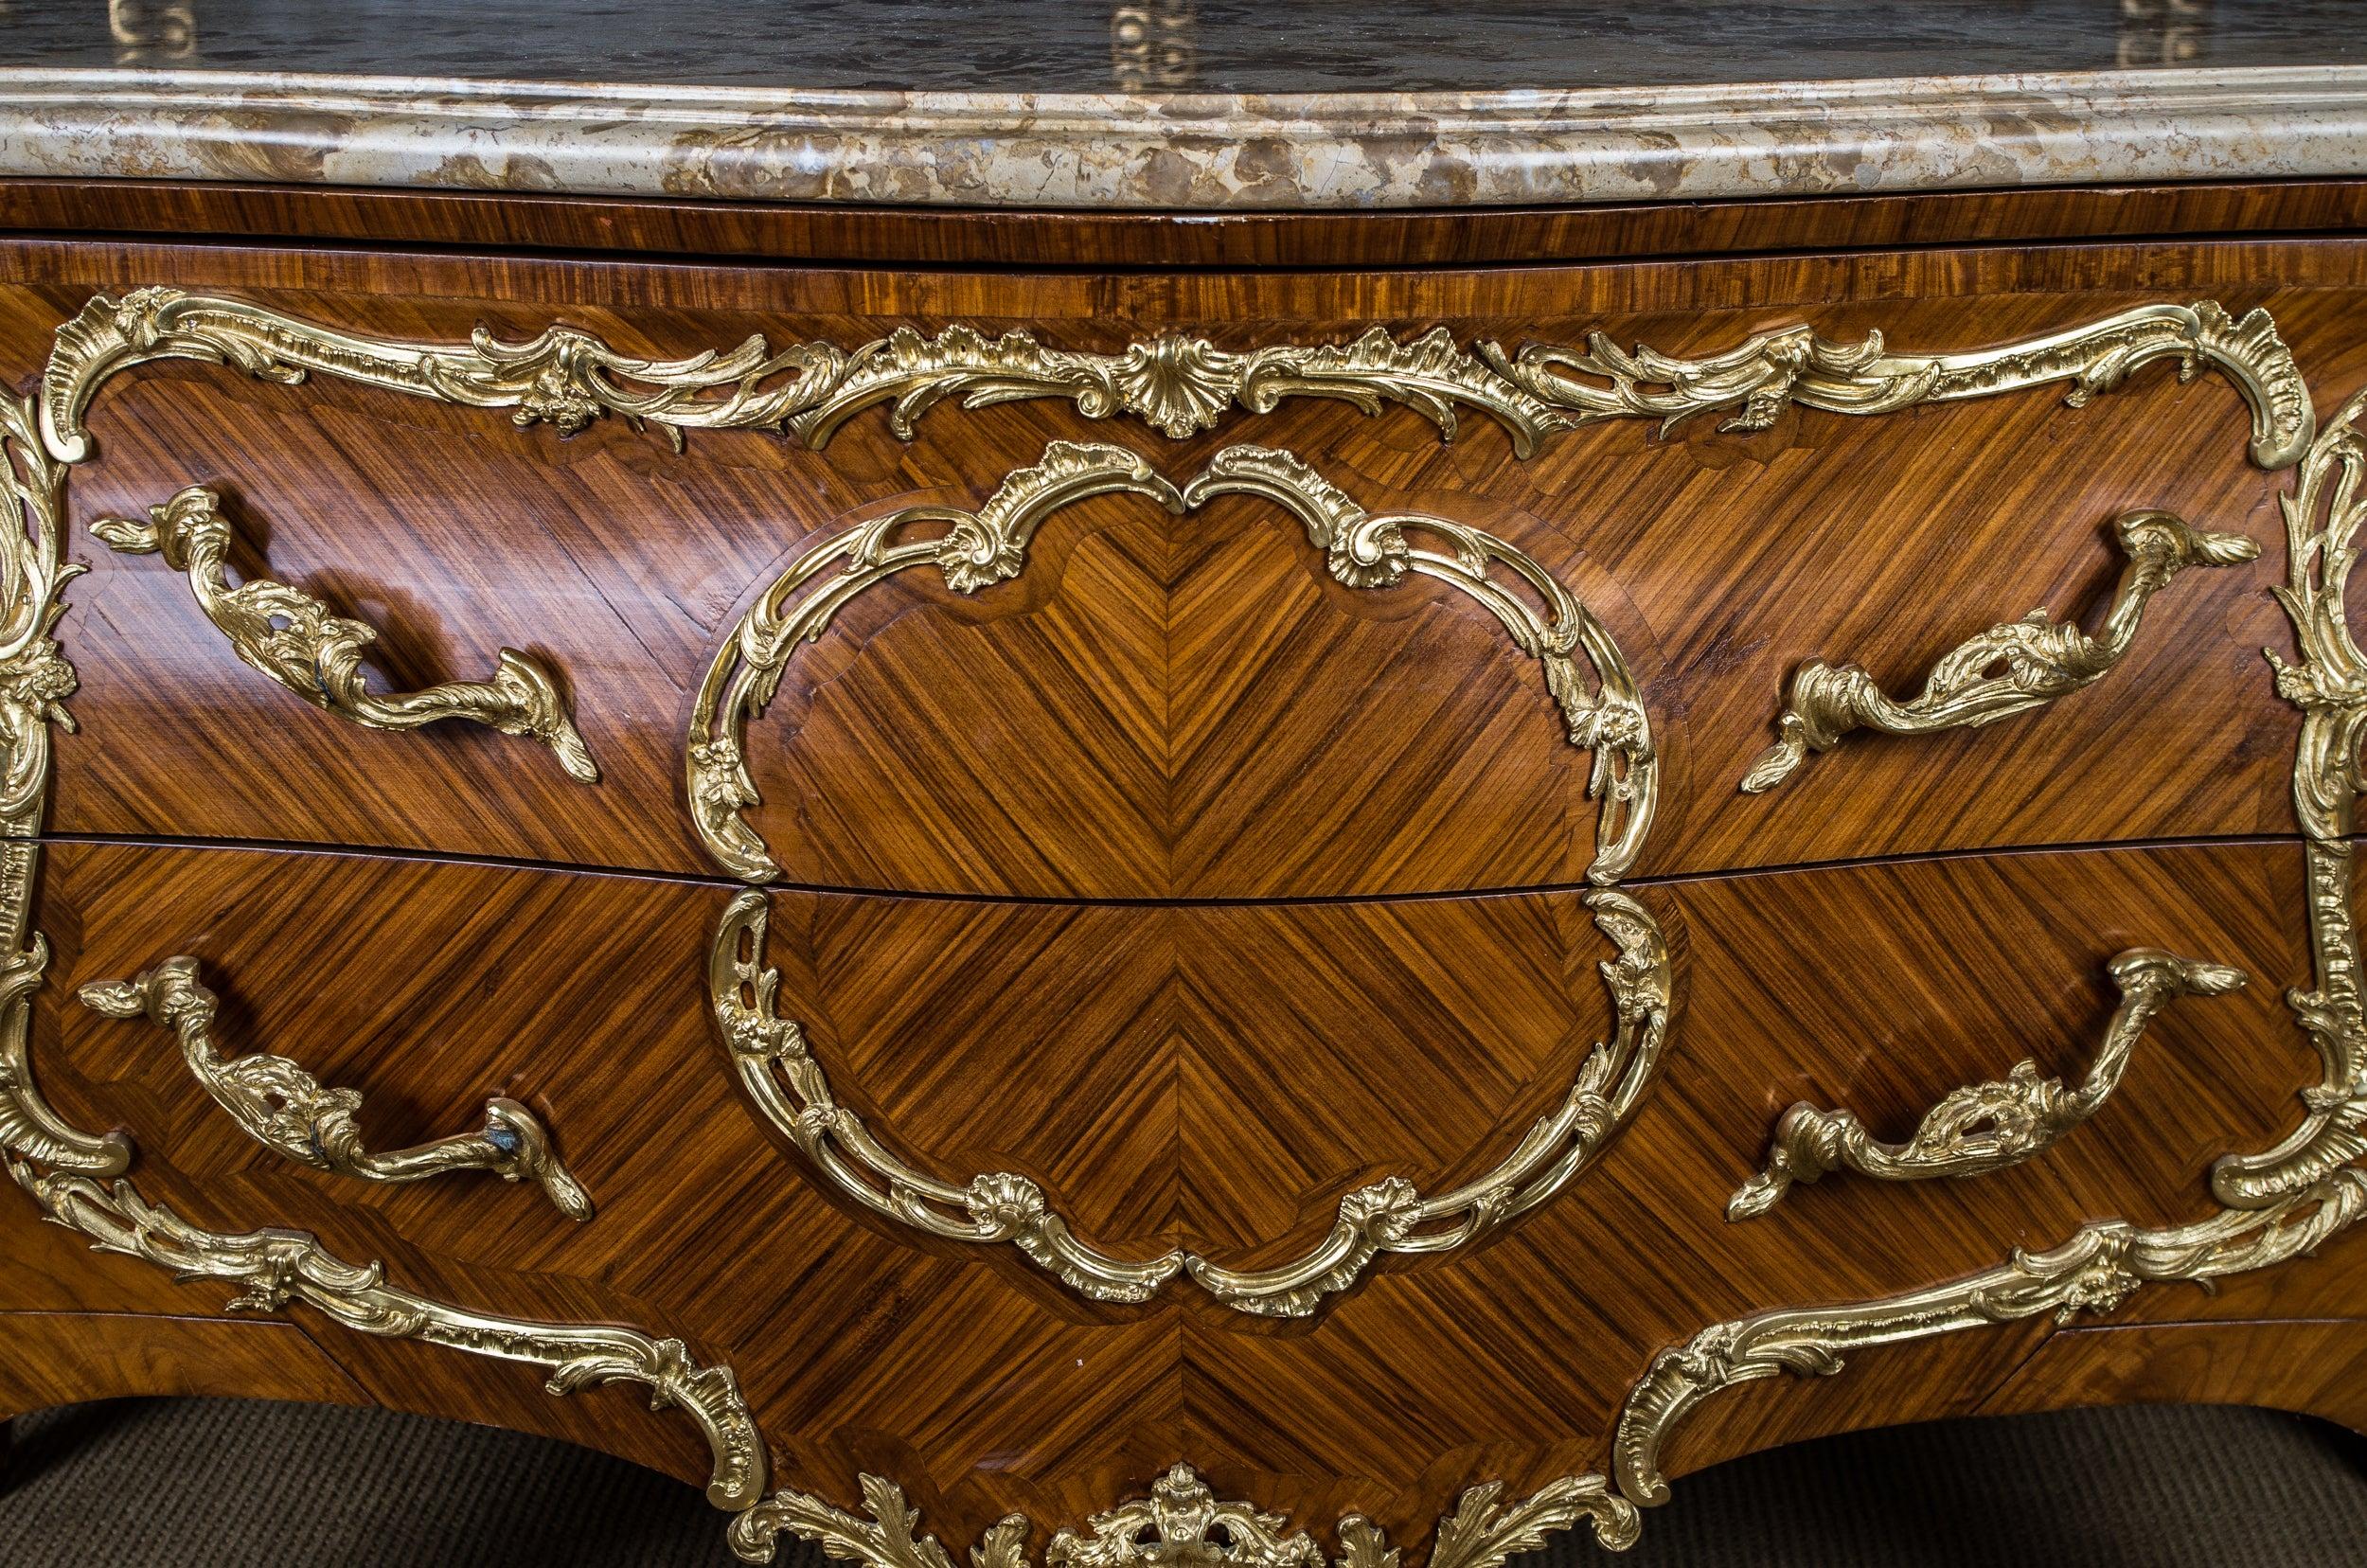 20th Century High Quality French Chest of Drawers in the Louis Quinze Style Marble Top